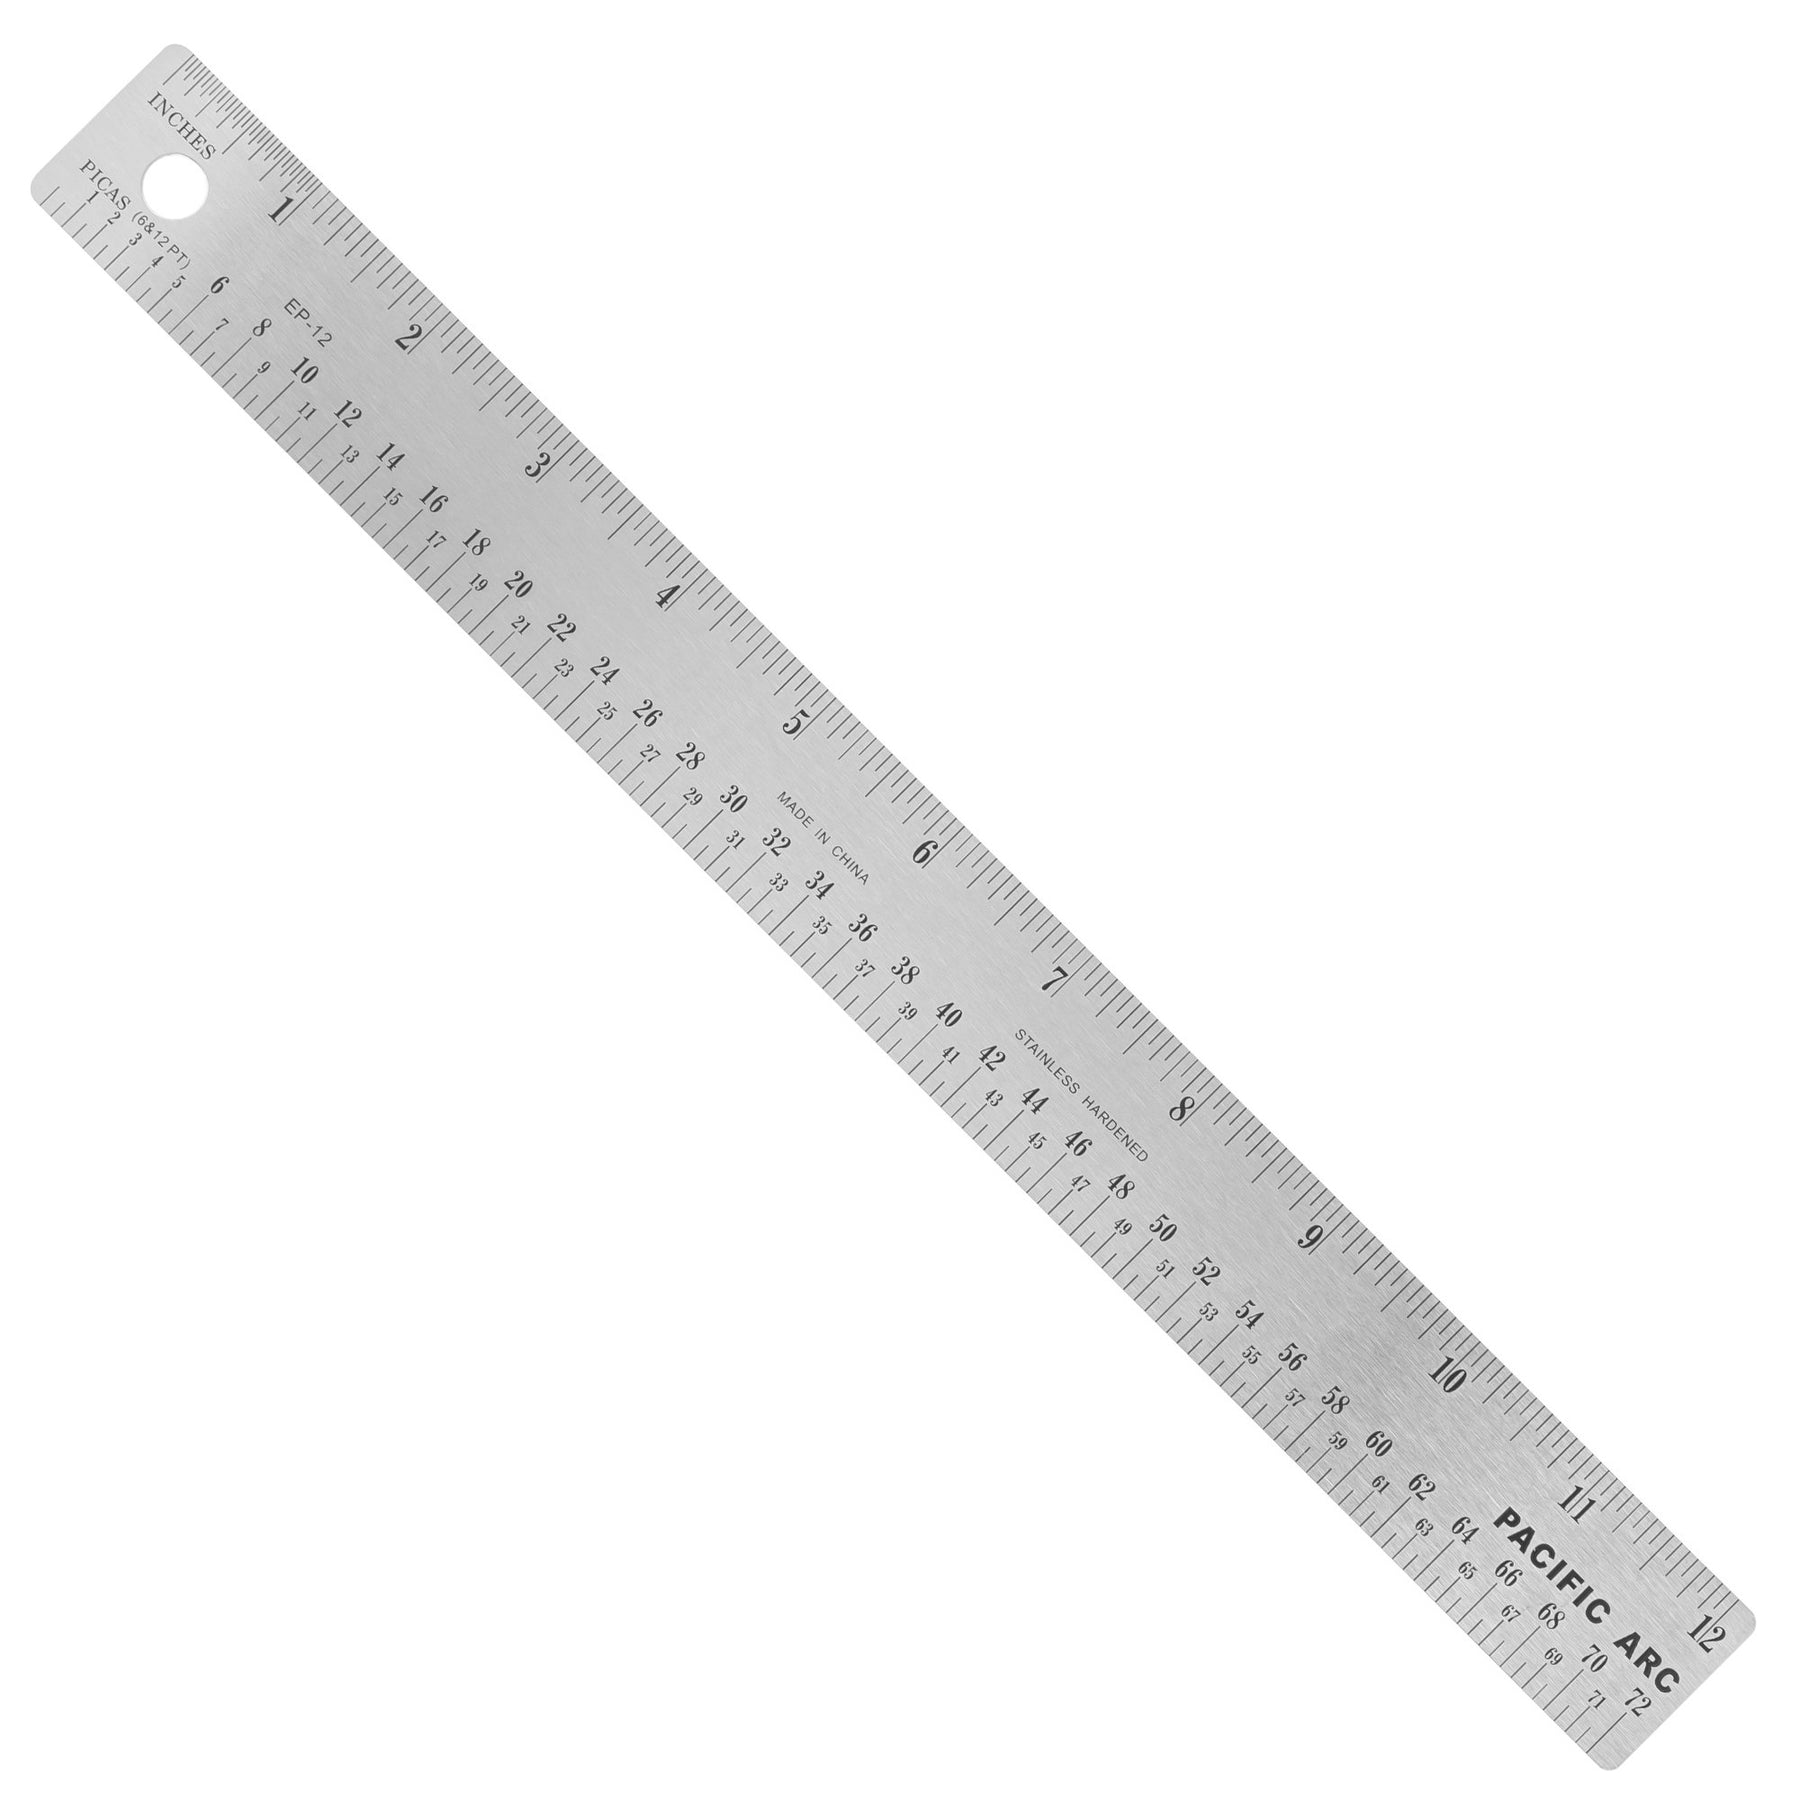 Pacific Arc, Stainless Steel Ruler with Inch (32nd & 64th) and Pica, Non Skid Cork or Rubber Back